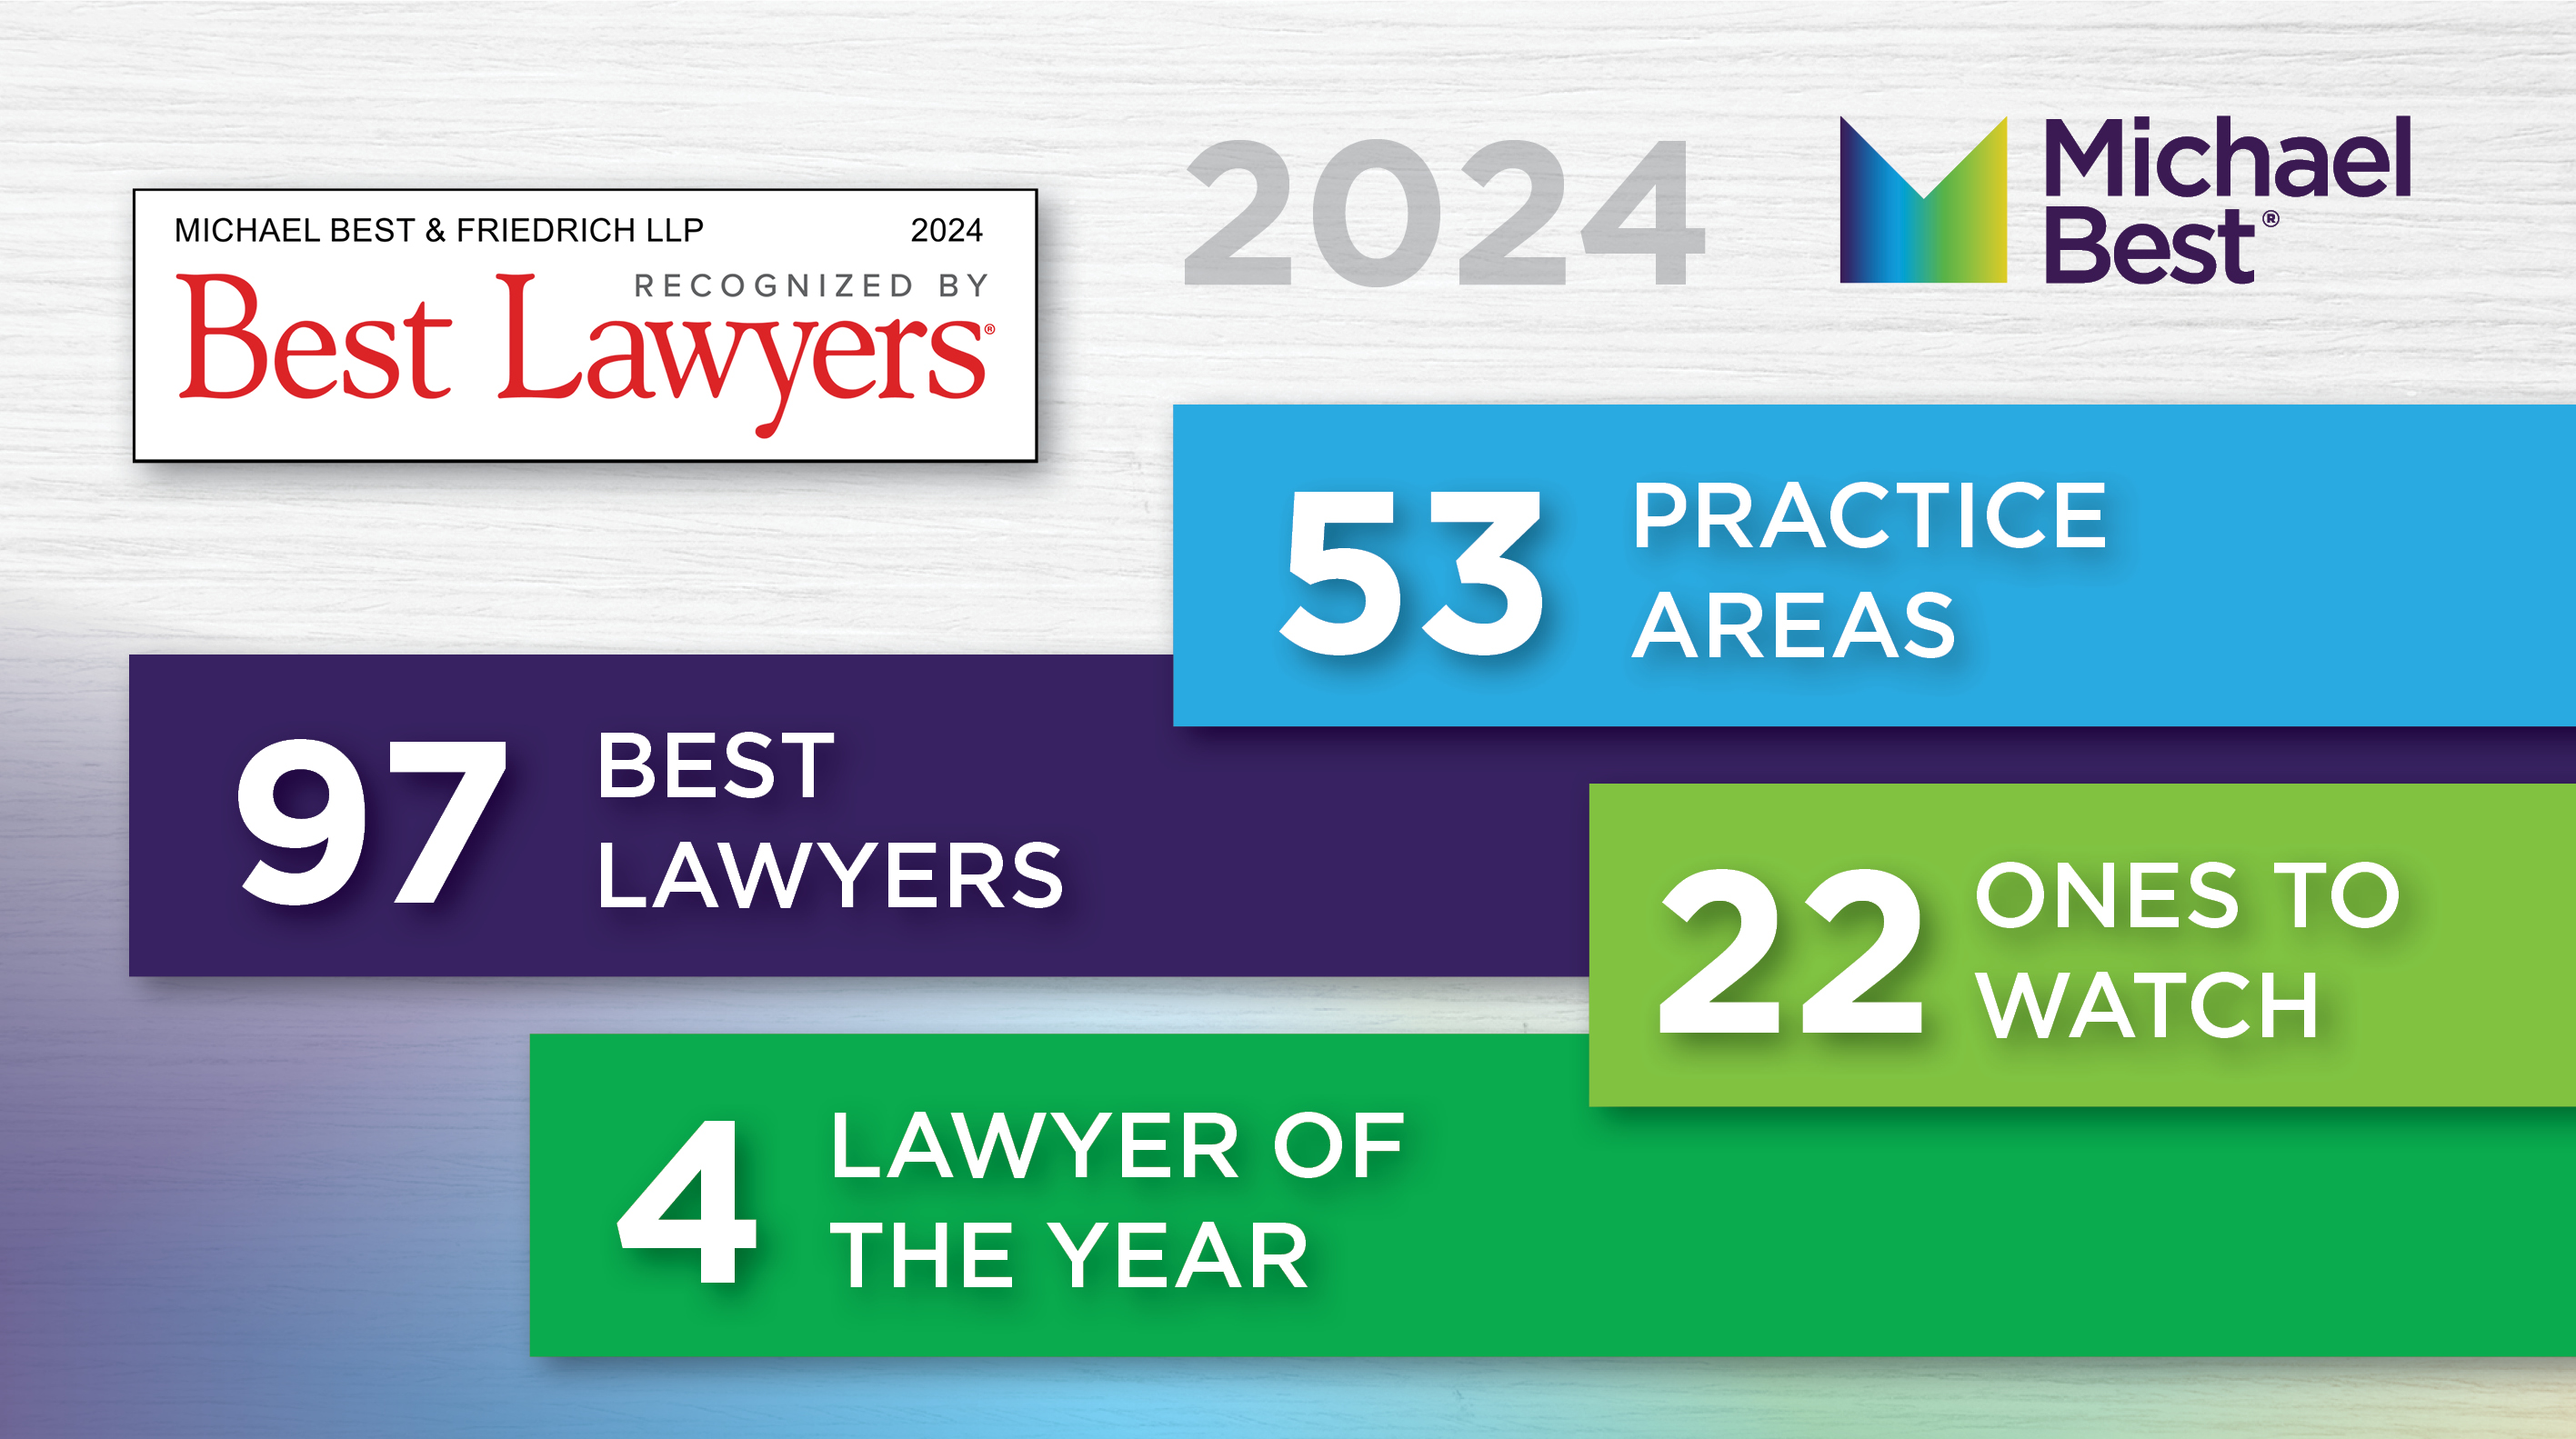 88 Michael Best Attorneys Earn Top Honors in The Best Lawyers in America 2022 List Photo